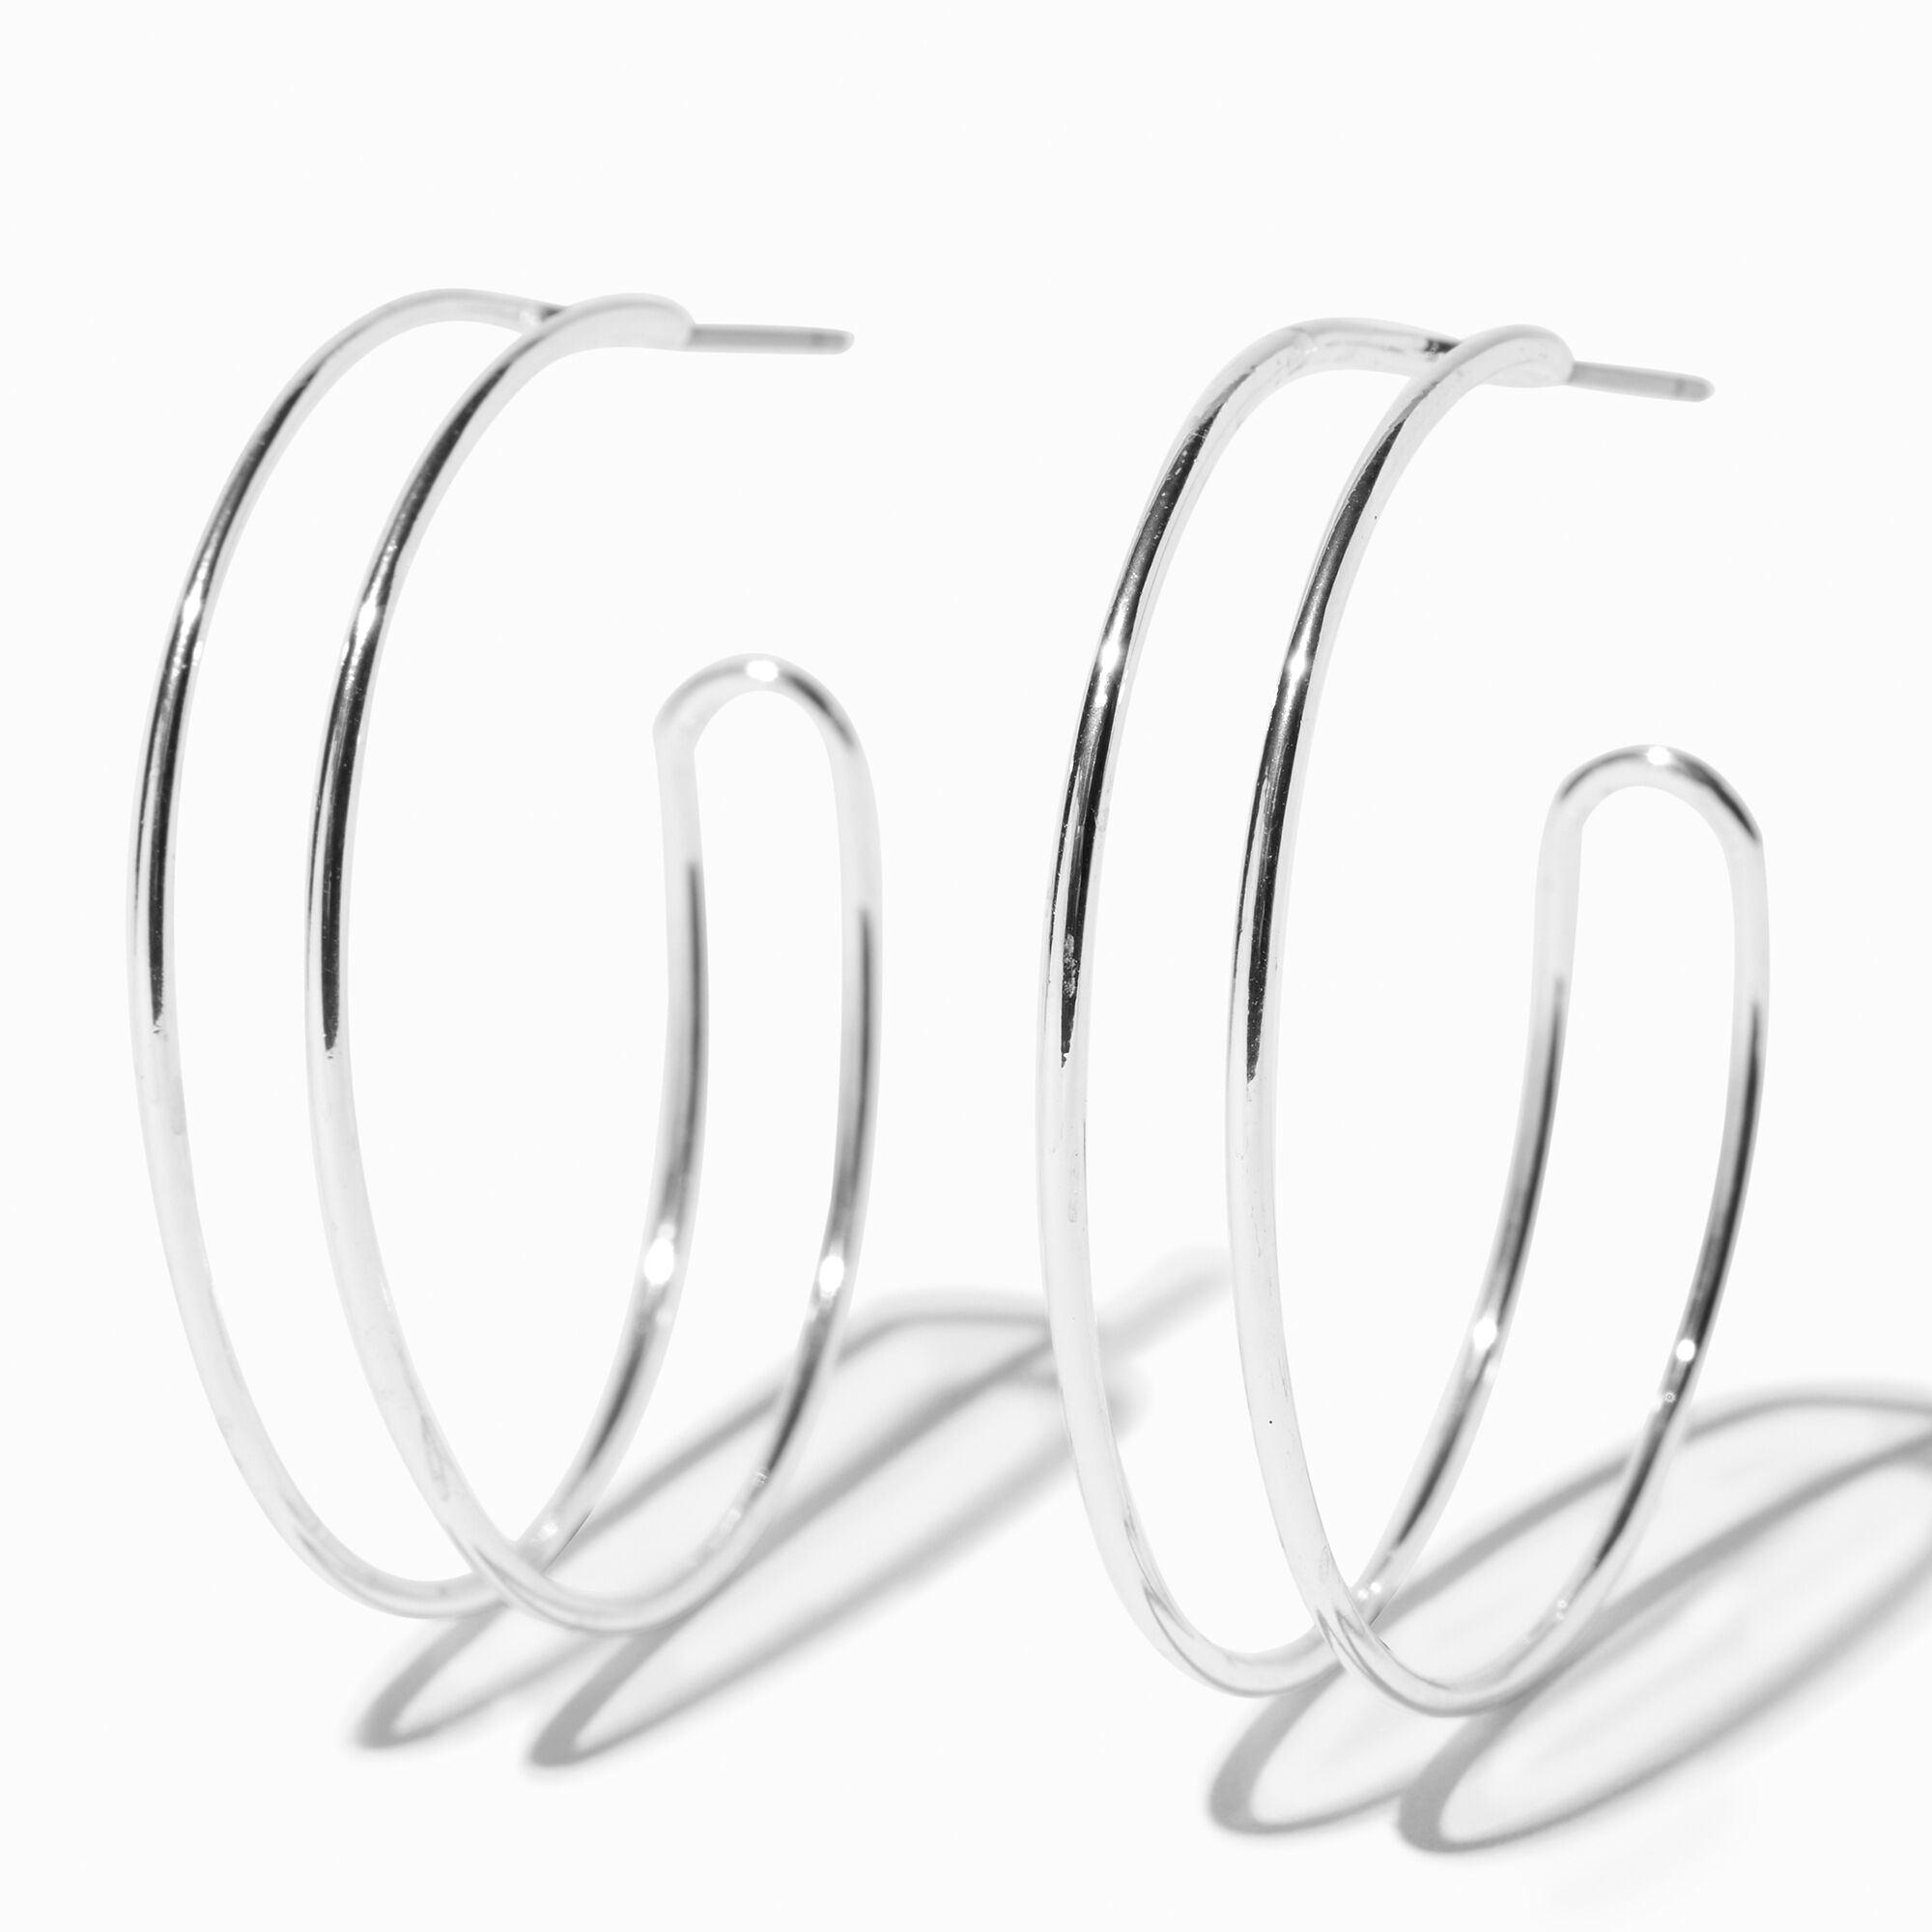 View Claires Tone 40MM Double Hoop Earrings Silver information